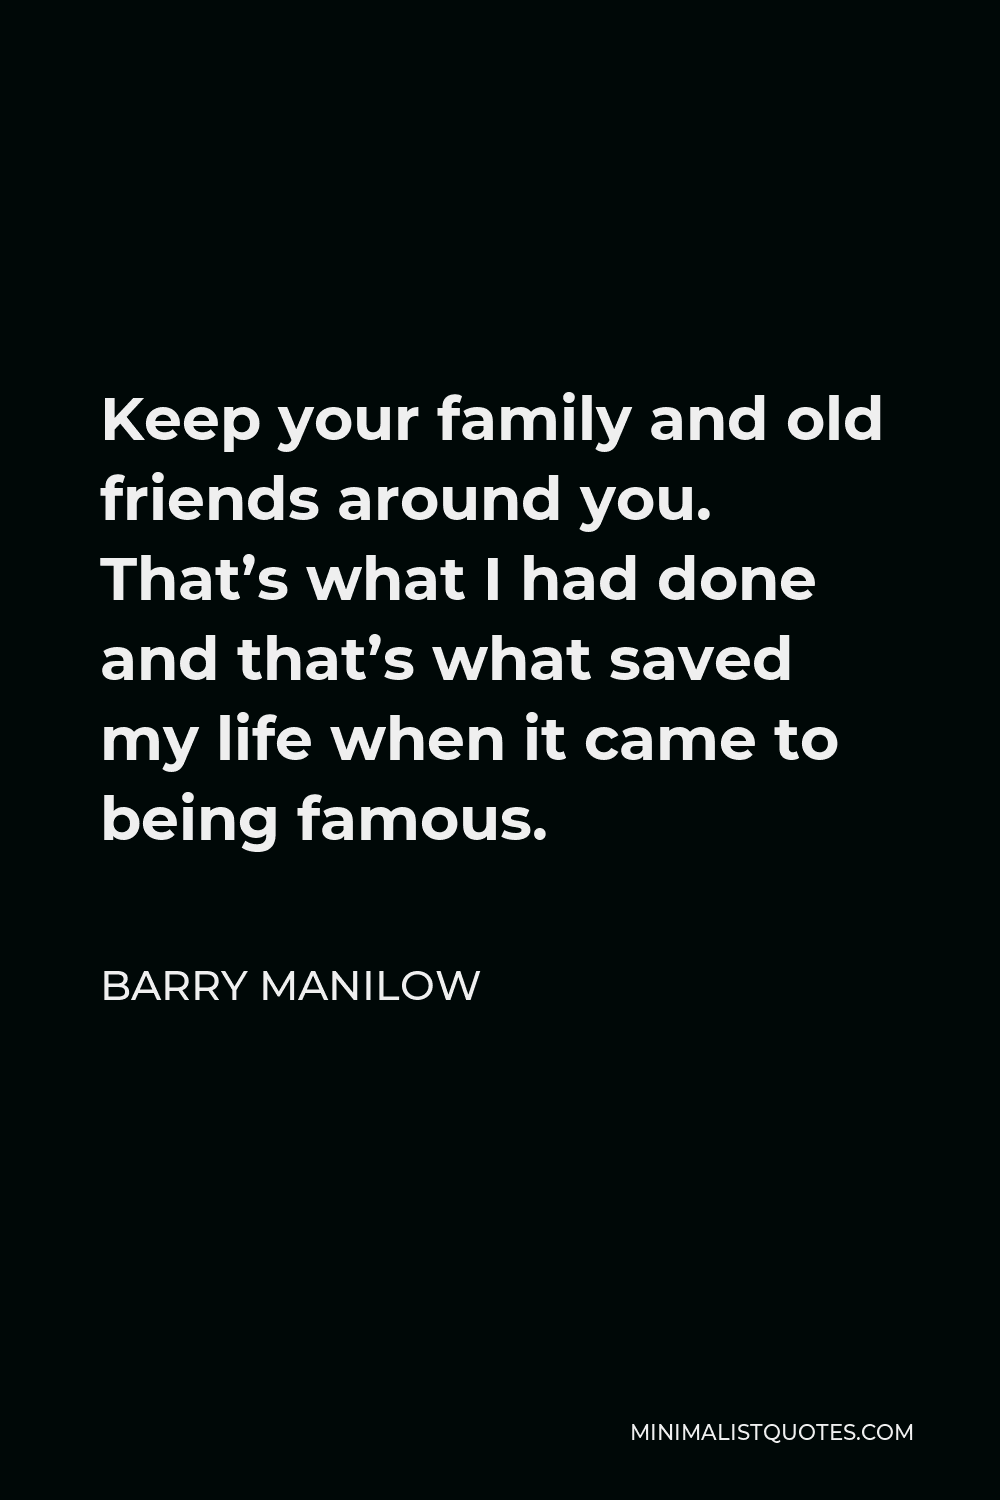 Barry Manilow Quote - Keep your family and old friends around you. That’s what I had done and that’s what saved my life when it came to being famous.